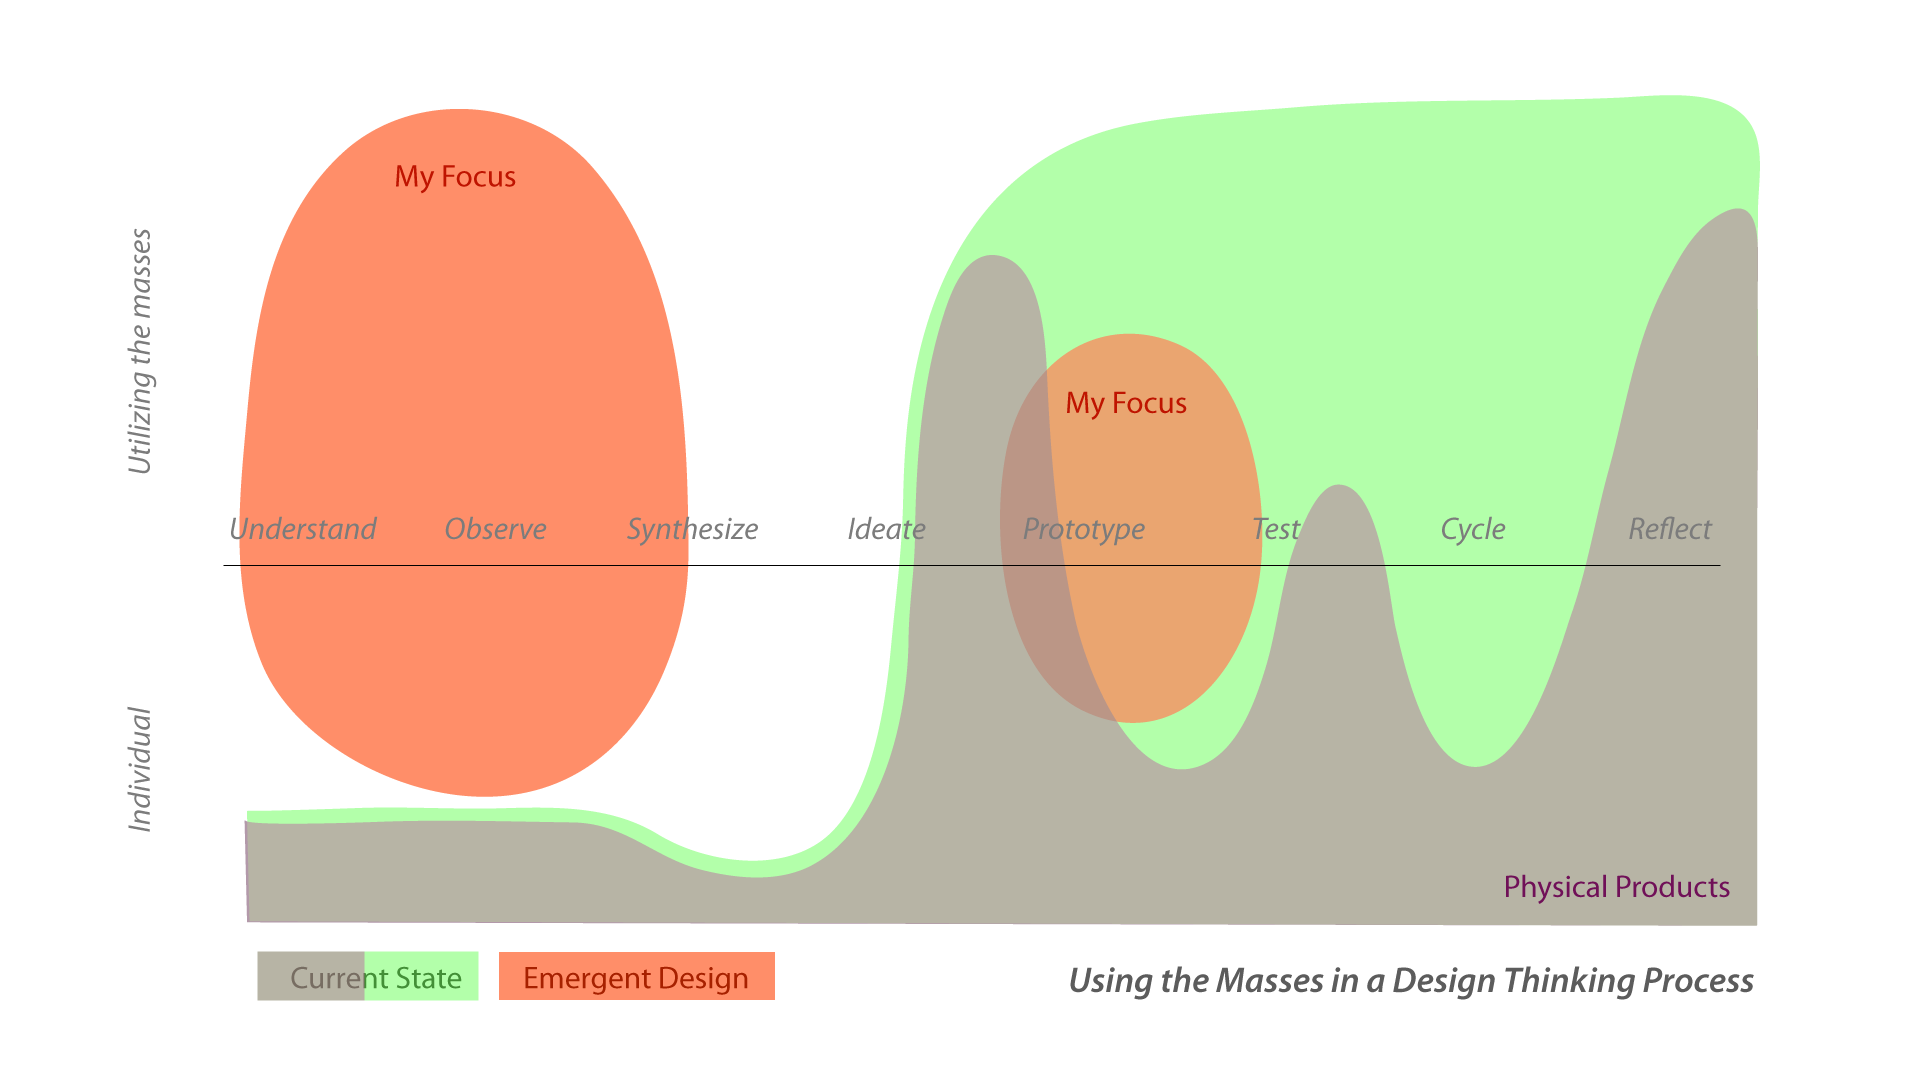 Using the masses in the design process